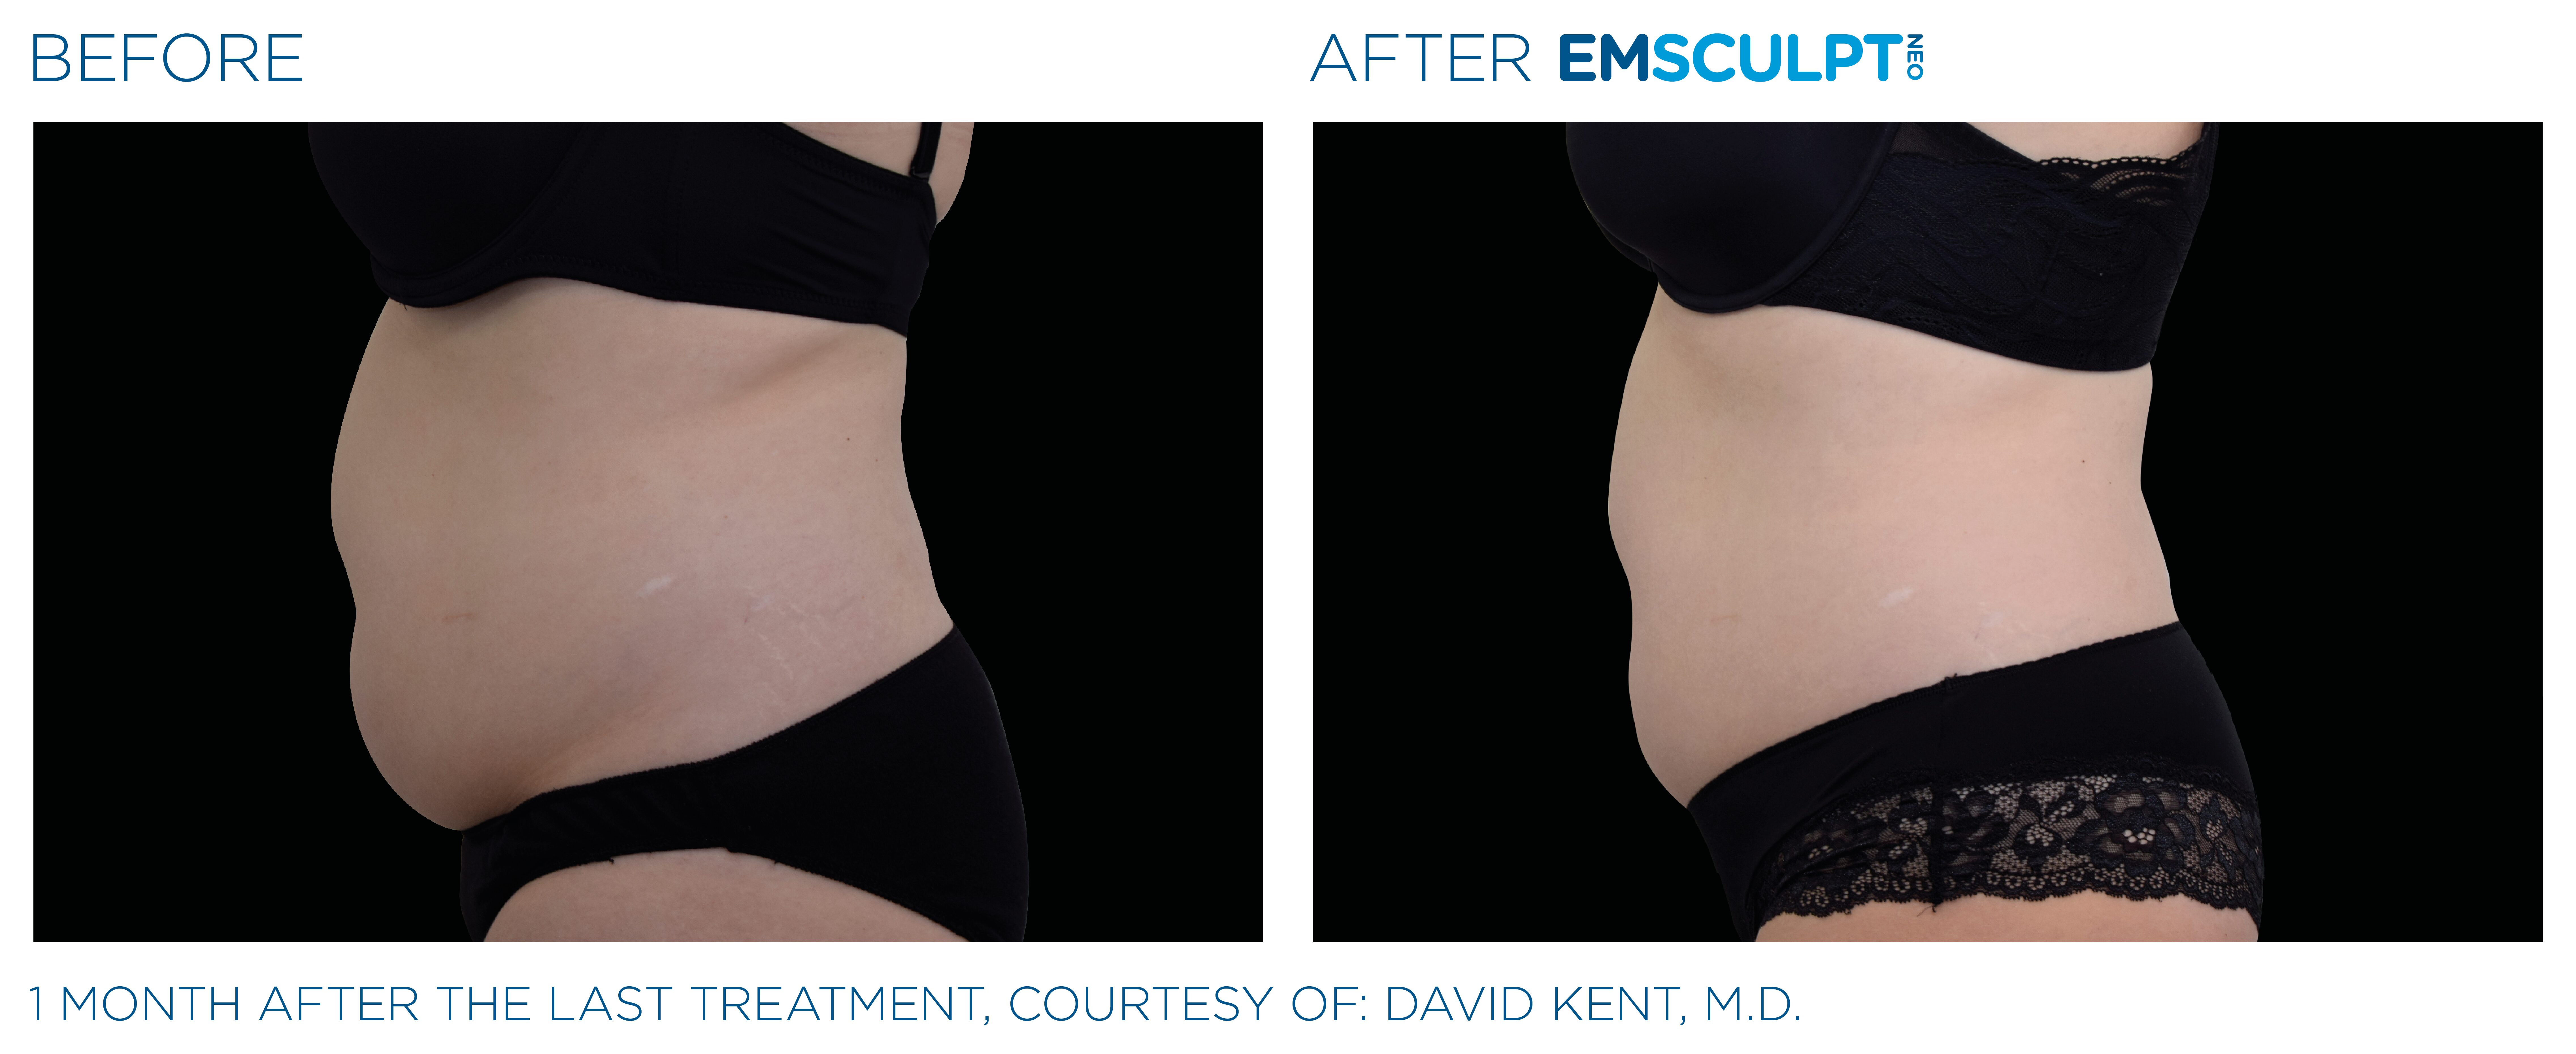 Emsculpt Neo Belly fat reduction treatment and body sculpting in seattle